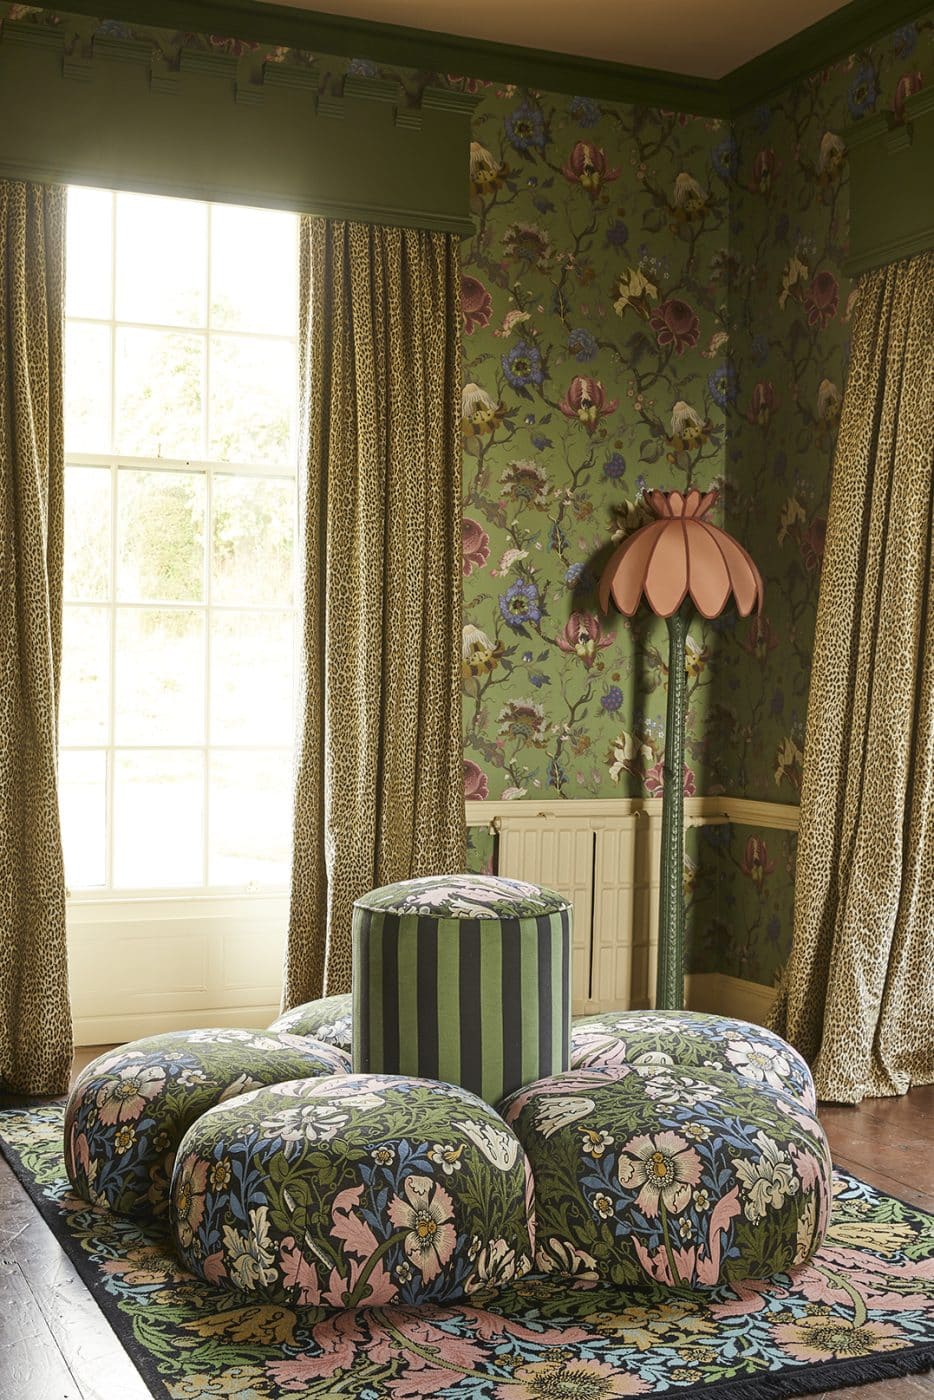 The drawing room at Trematon castle, decorated with green floral wallpaper, leopard-print curtains, the brand's Acanthus floor lamp, and a rug and round seating piece in a floral William Morris print